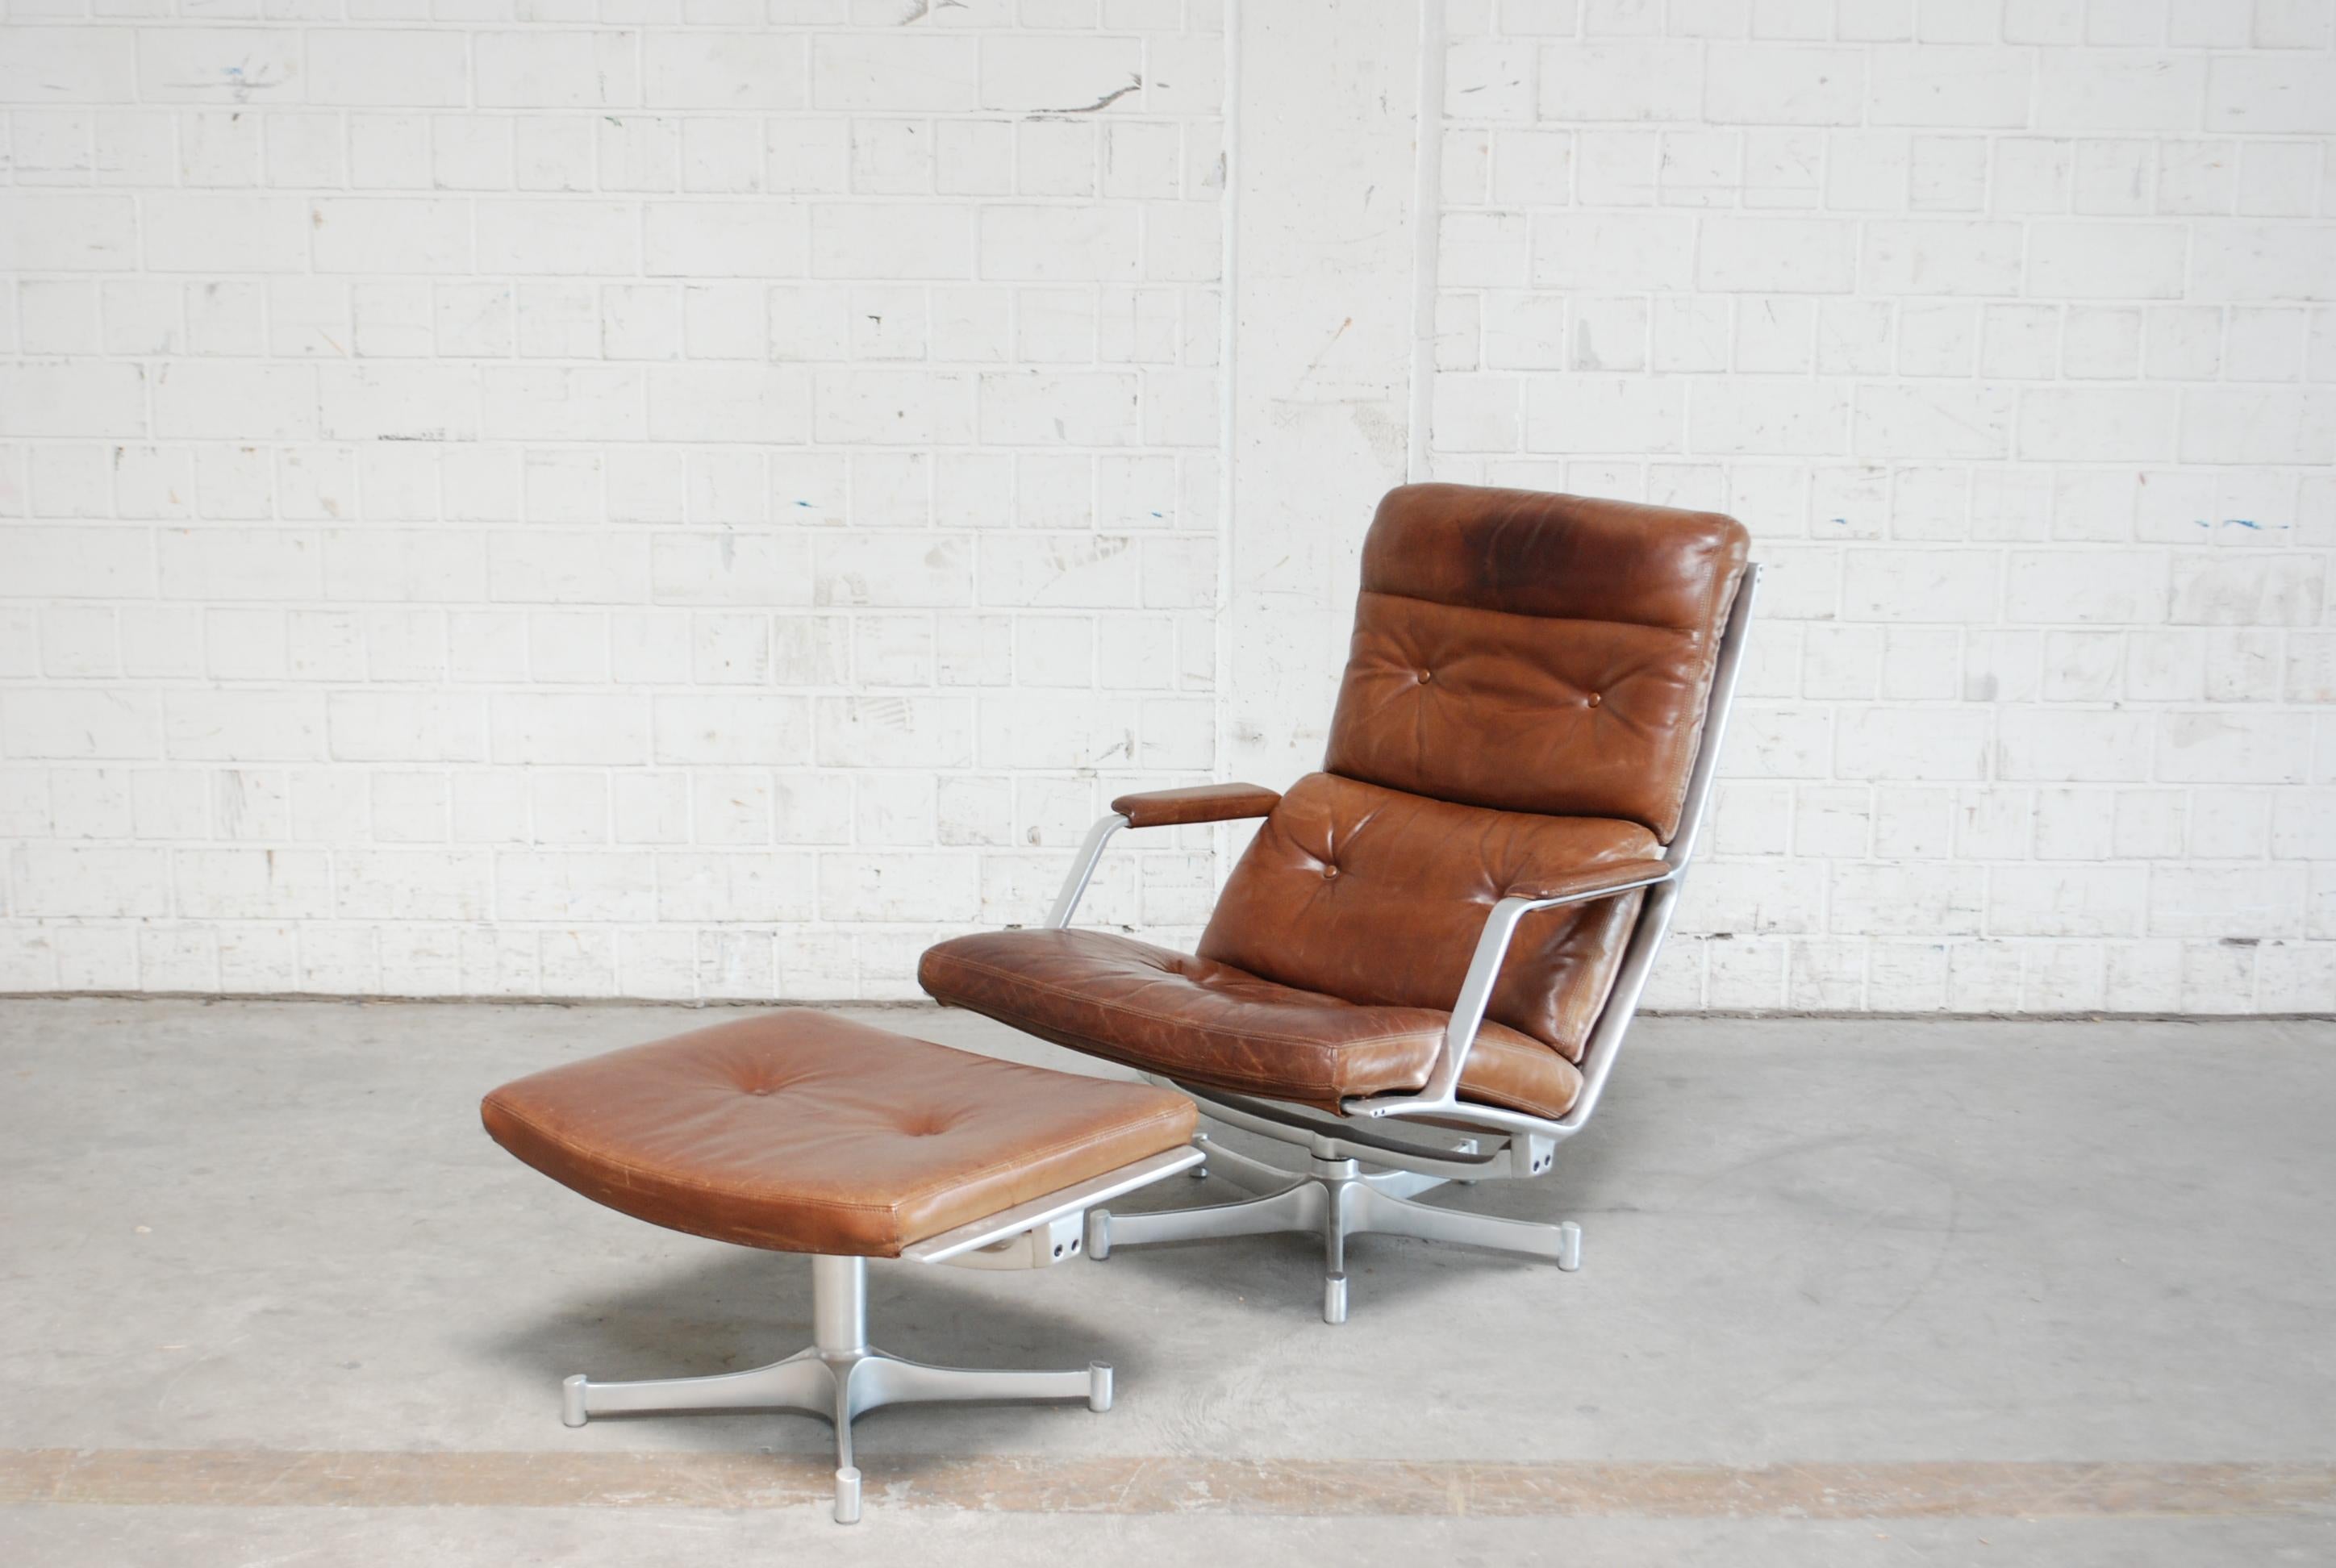 FK 85 was made by Jorgen Kastholm & Preben Fabricius for Kill international
The lounge chair and ottoman has an swivel aluminium frame and cognac Leather.
The leather has patina on the headrest.
The colour is a brown cognac.